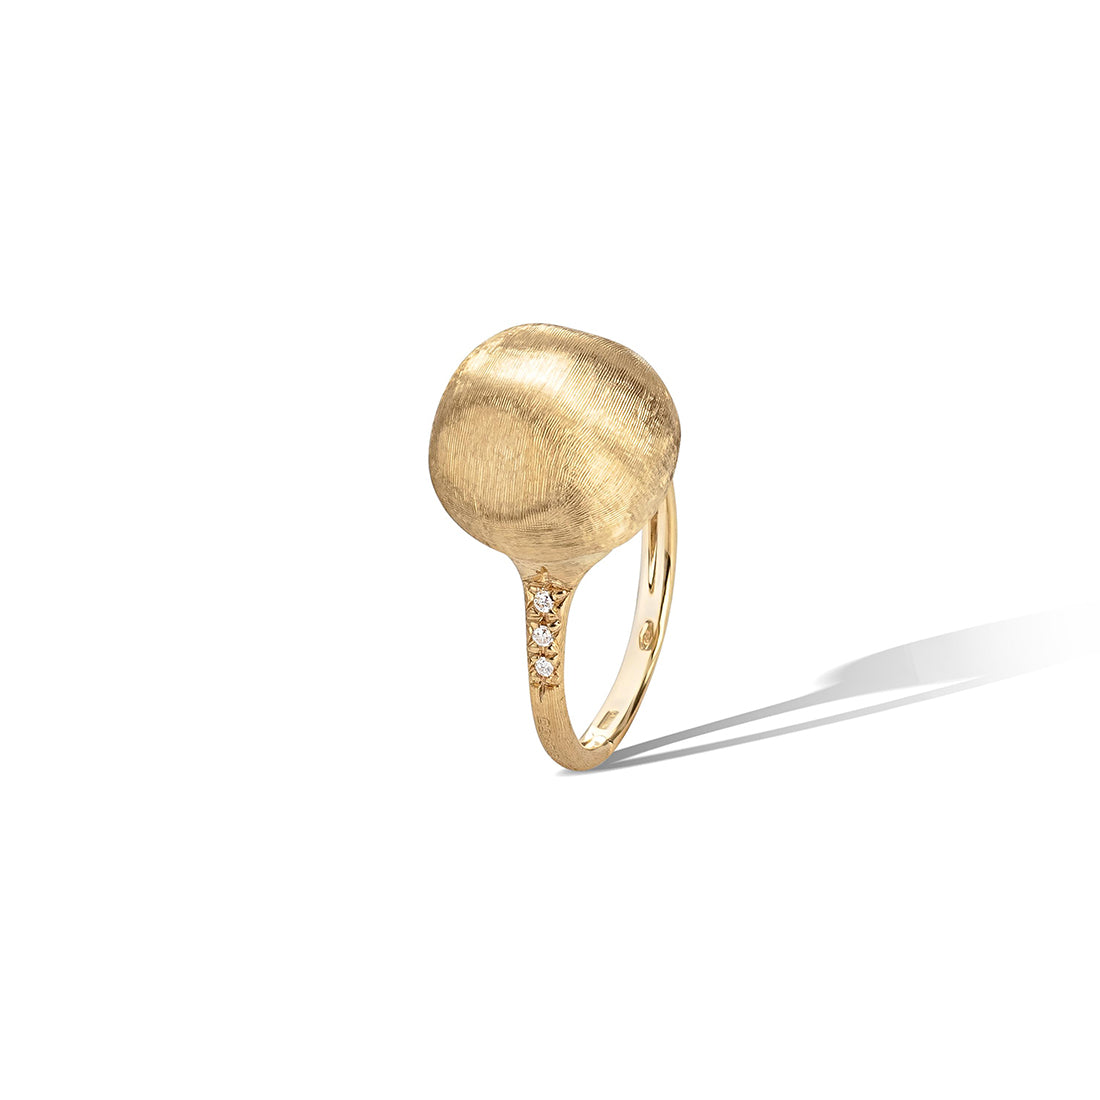 Marco Bicego Africa 18ct Yellow Gold Sphere Diamond Ring